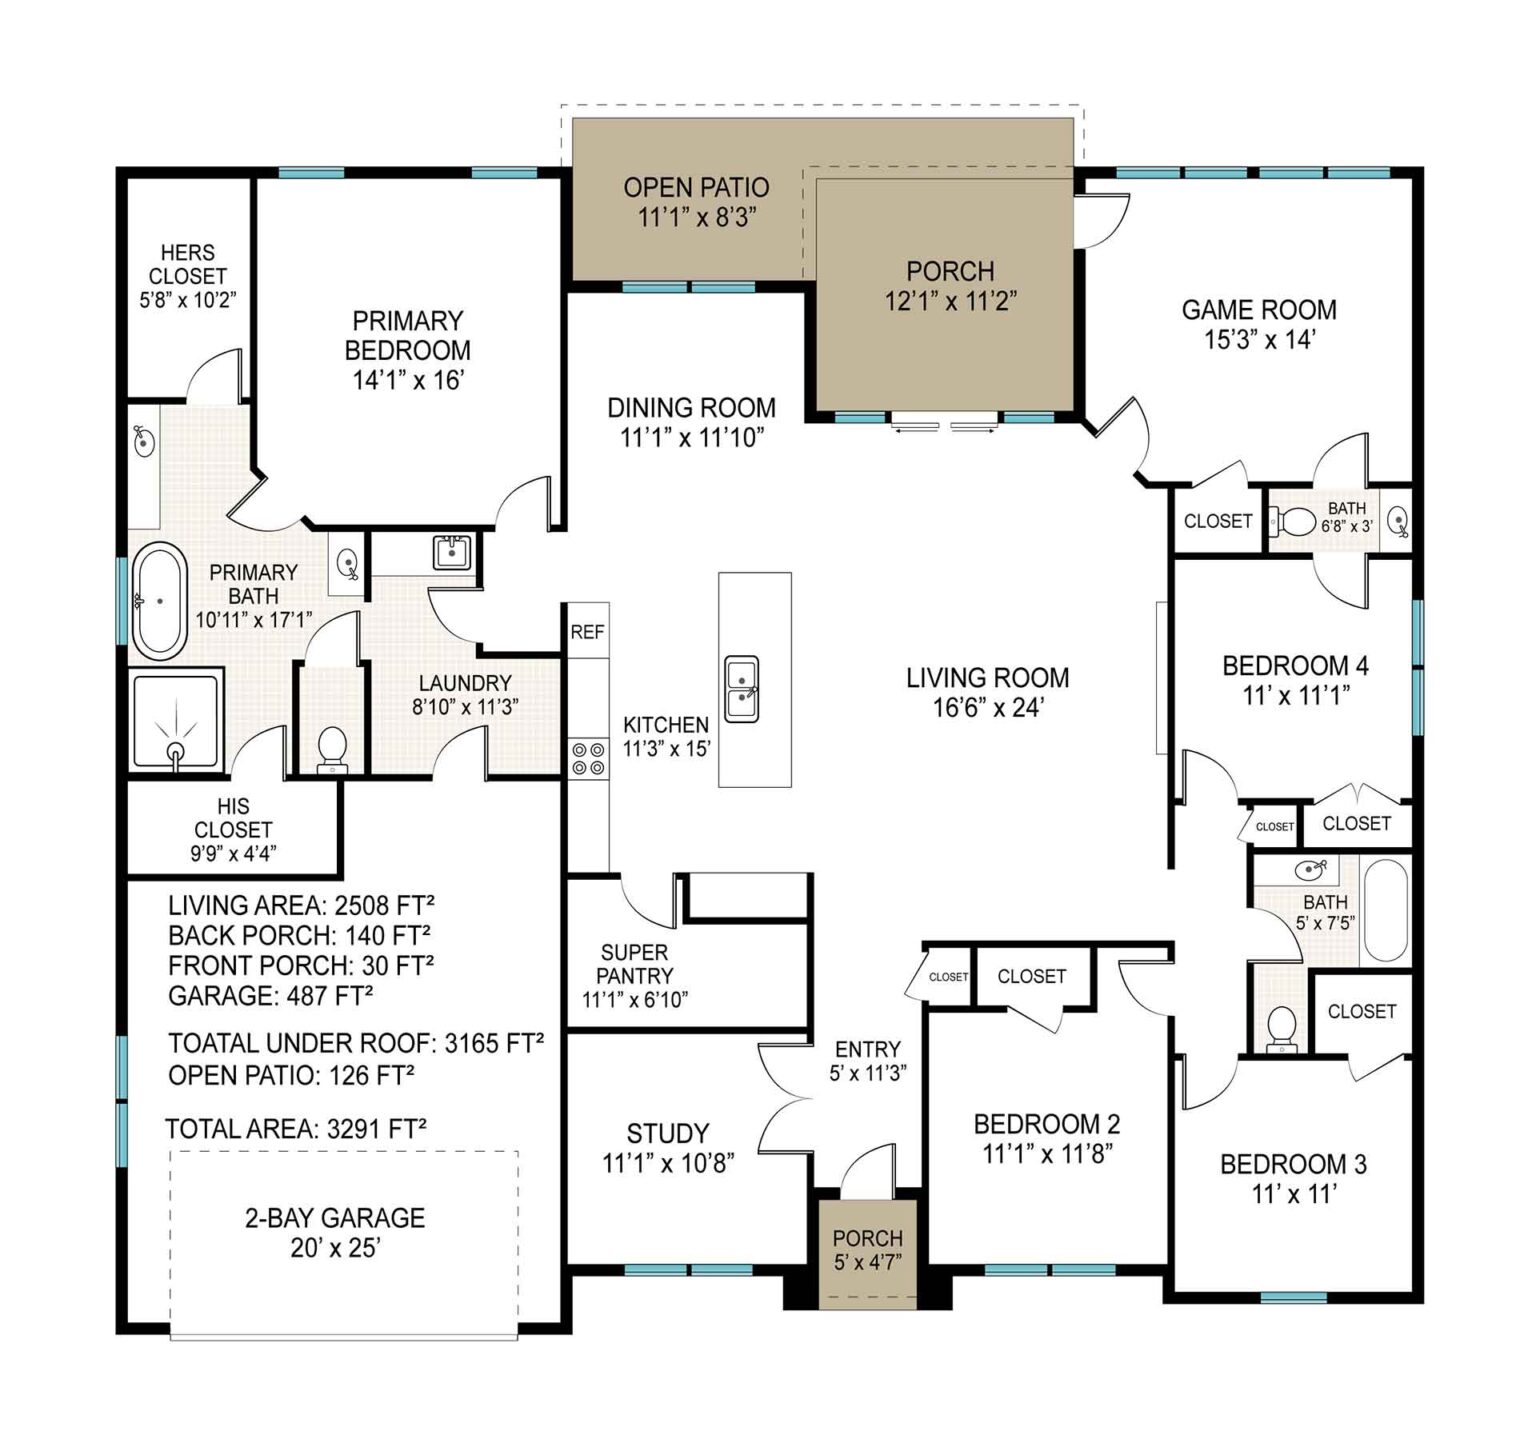 Modern 4-bedroom home with two bonus rooms, featuring 2508 sqft of heated and cooled living space within a total footprint of 3291 sqft. Presented by Pyramid Homes.